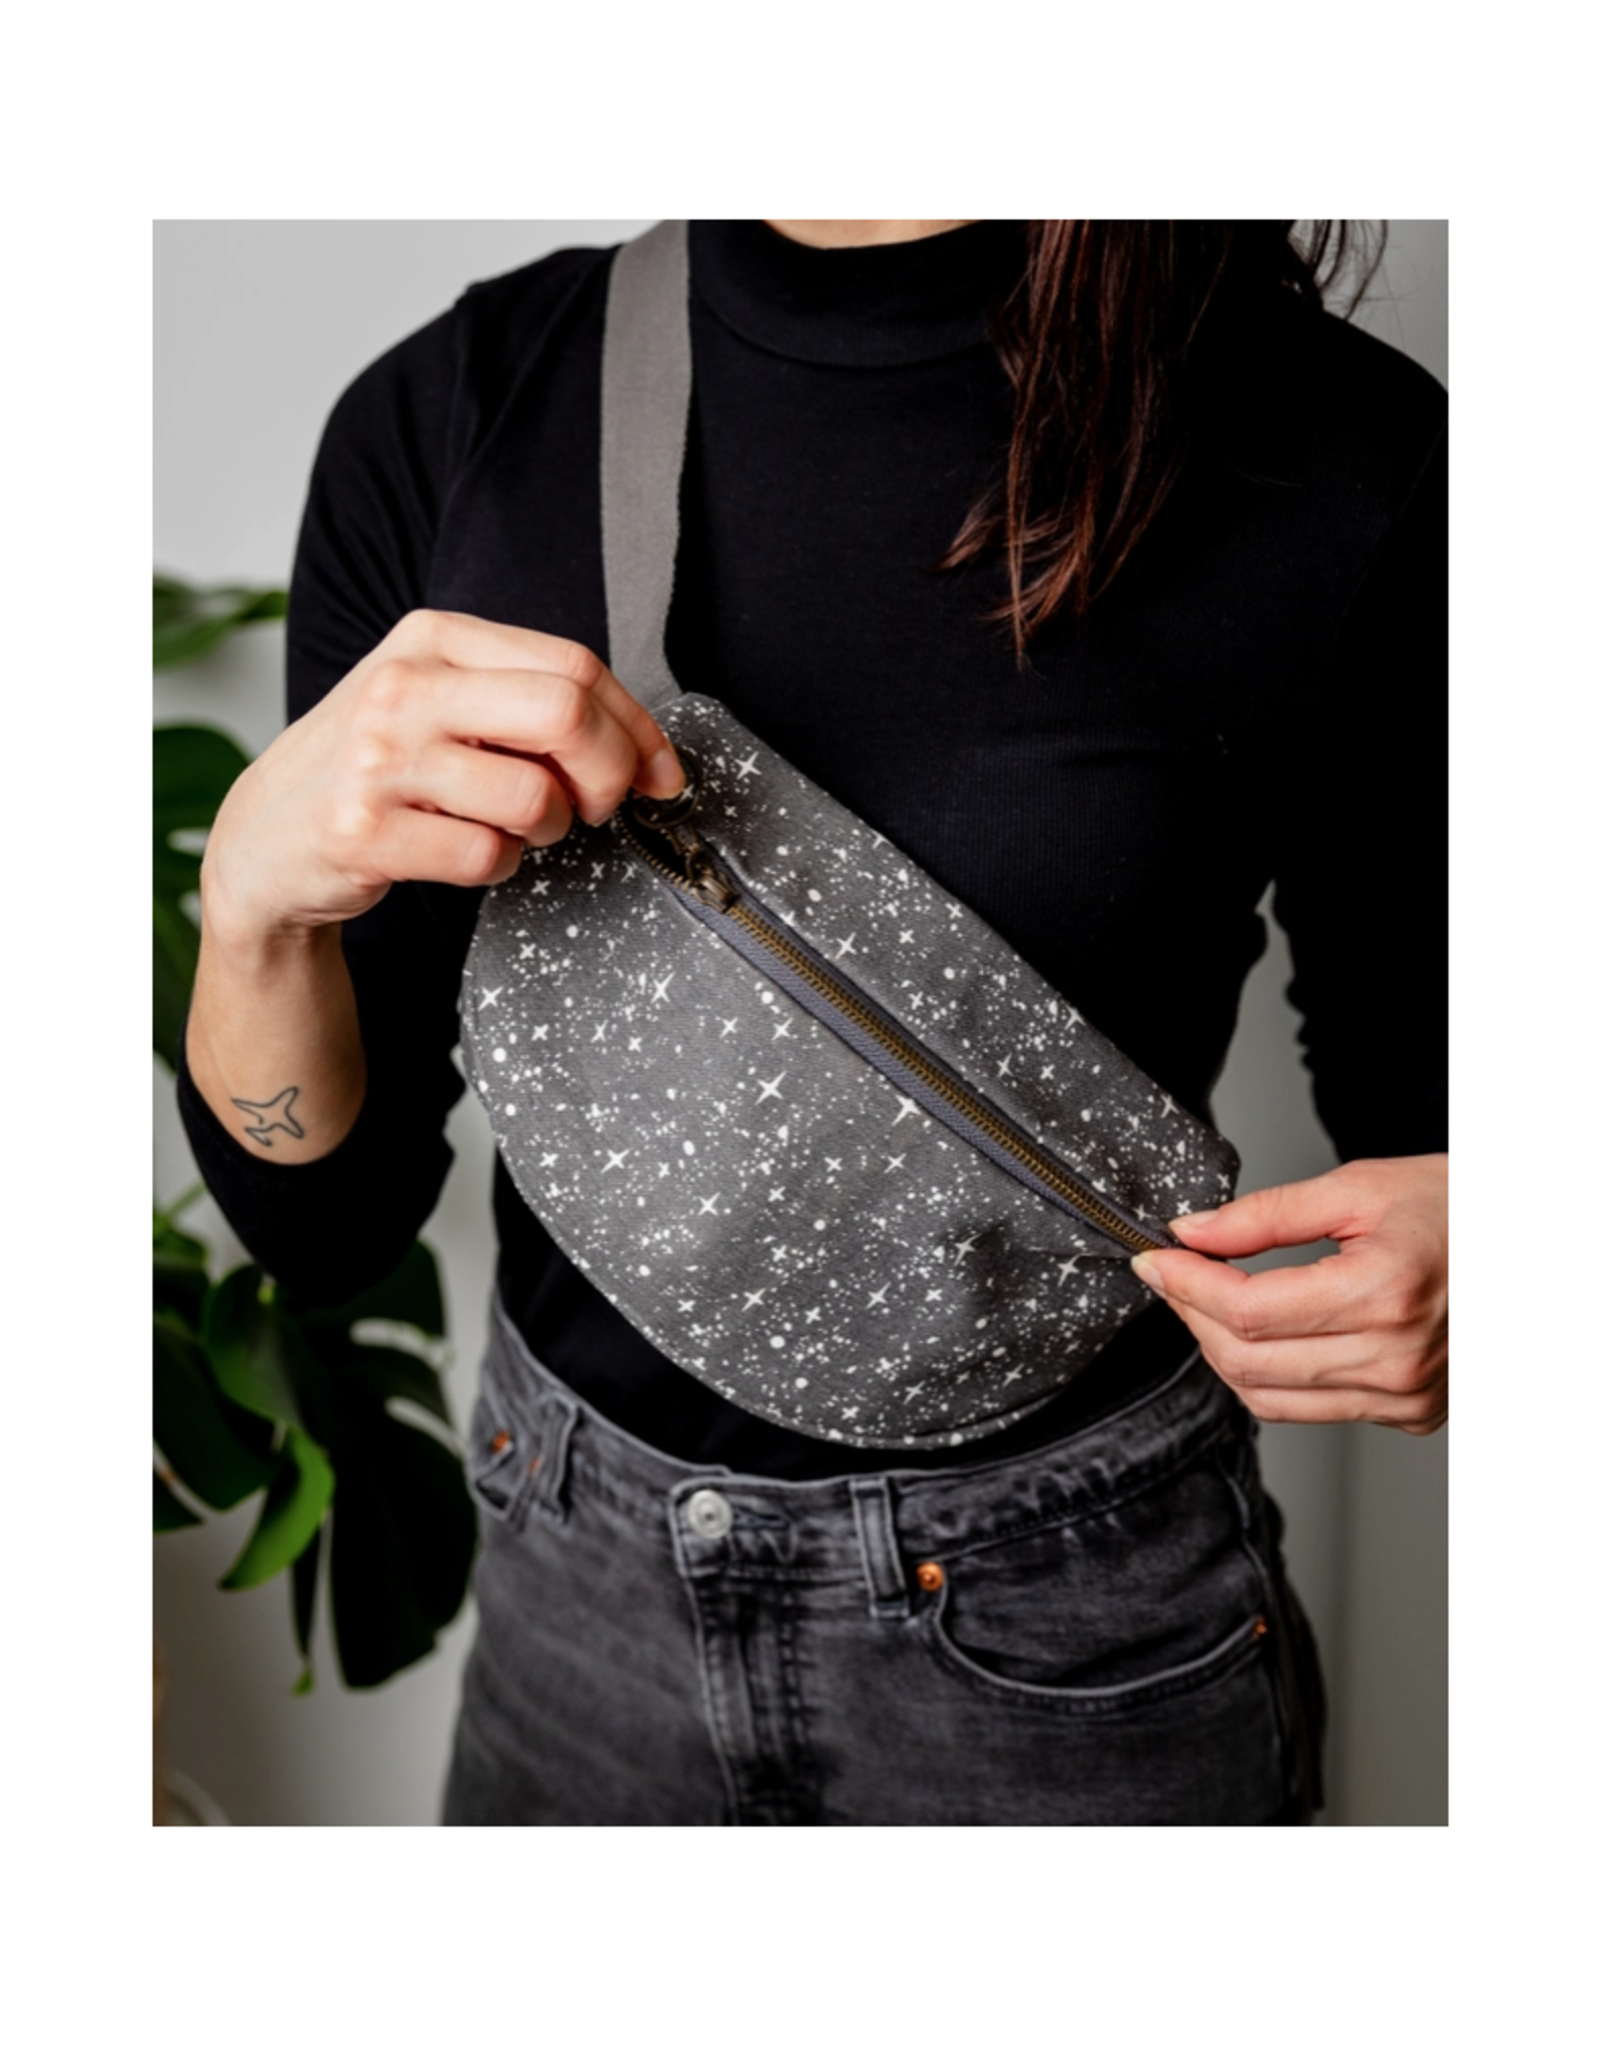 Far And Away Fanny Pack